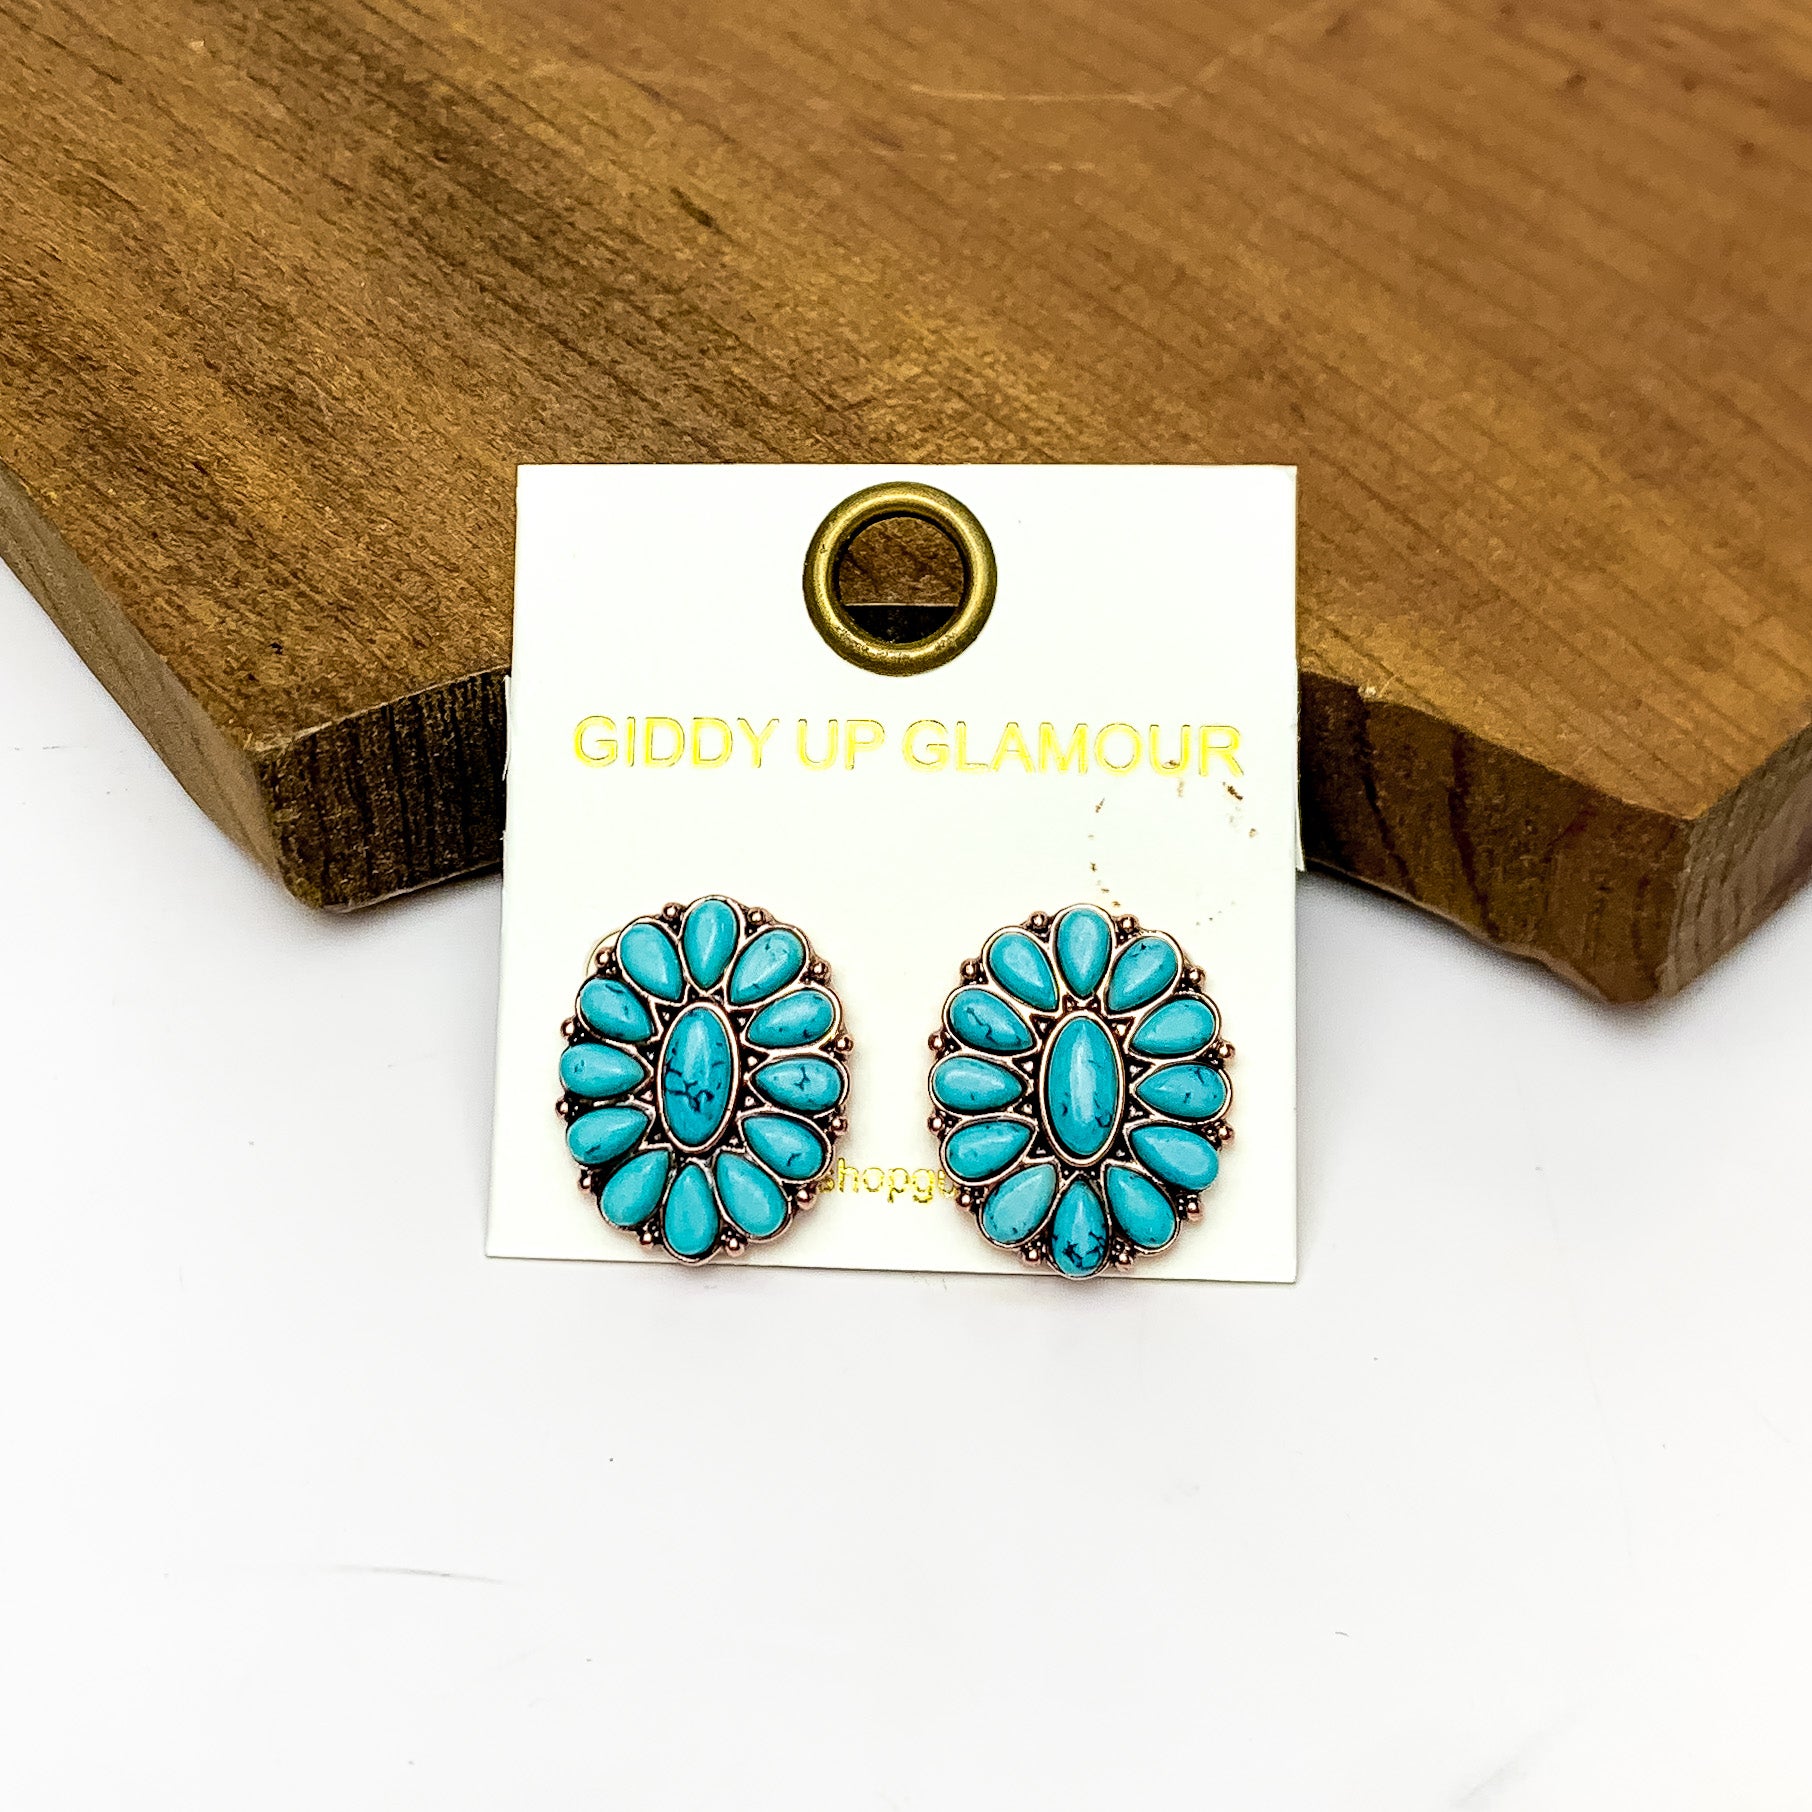 Copper Tone Concho Cluster Oval Earrings in Turquoise Blue. Pictured on a white background with the earrings laying against a wood piece.